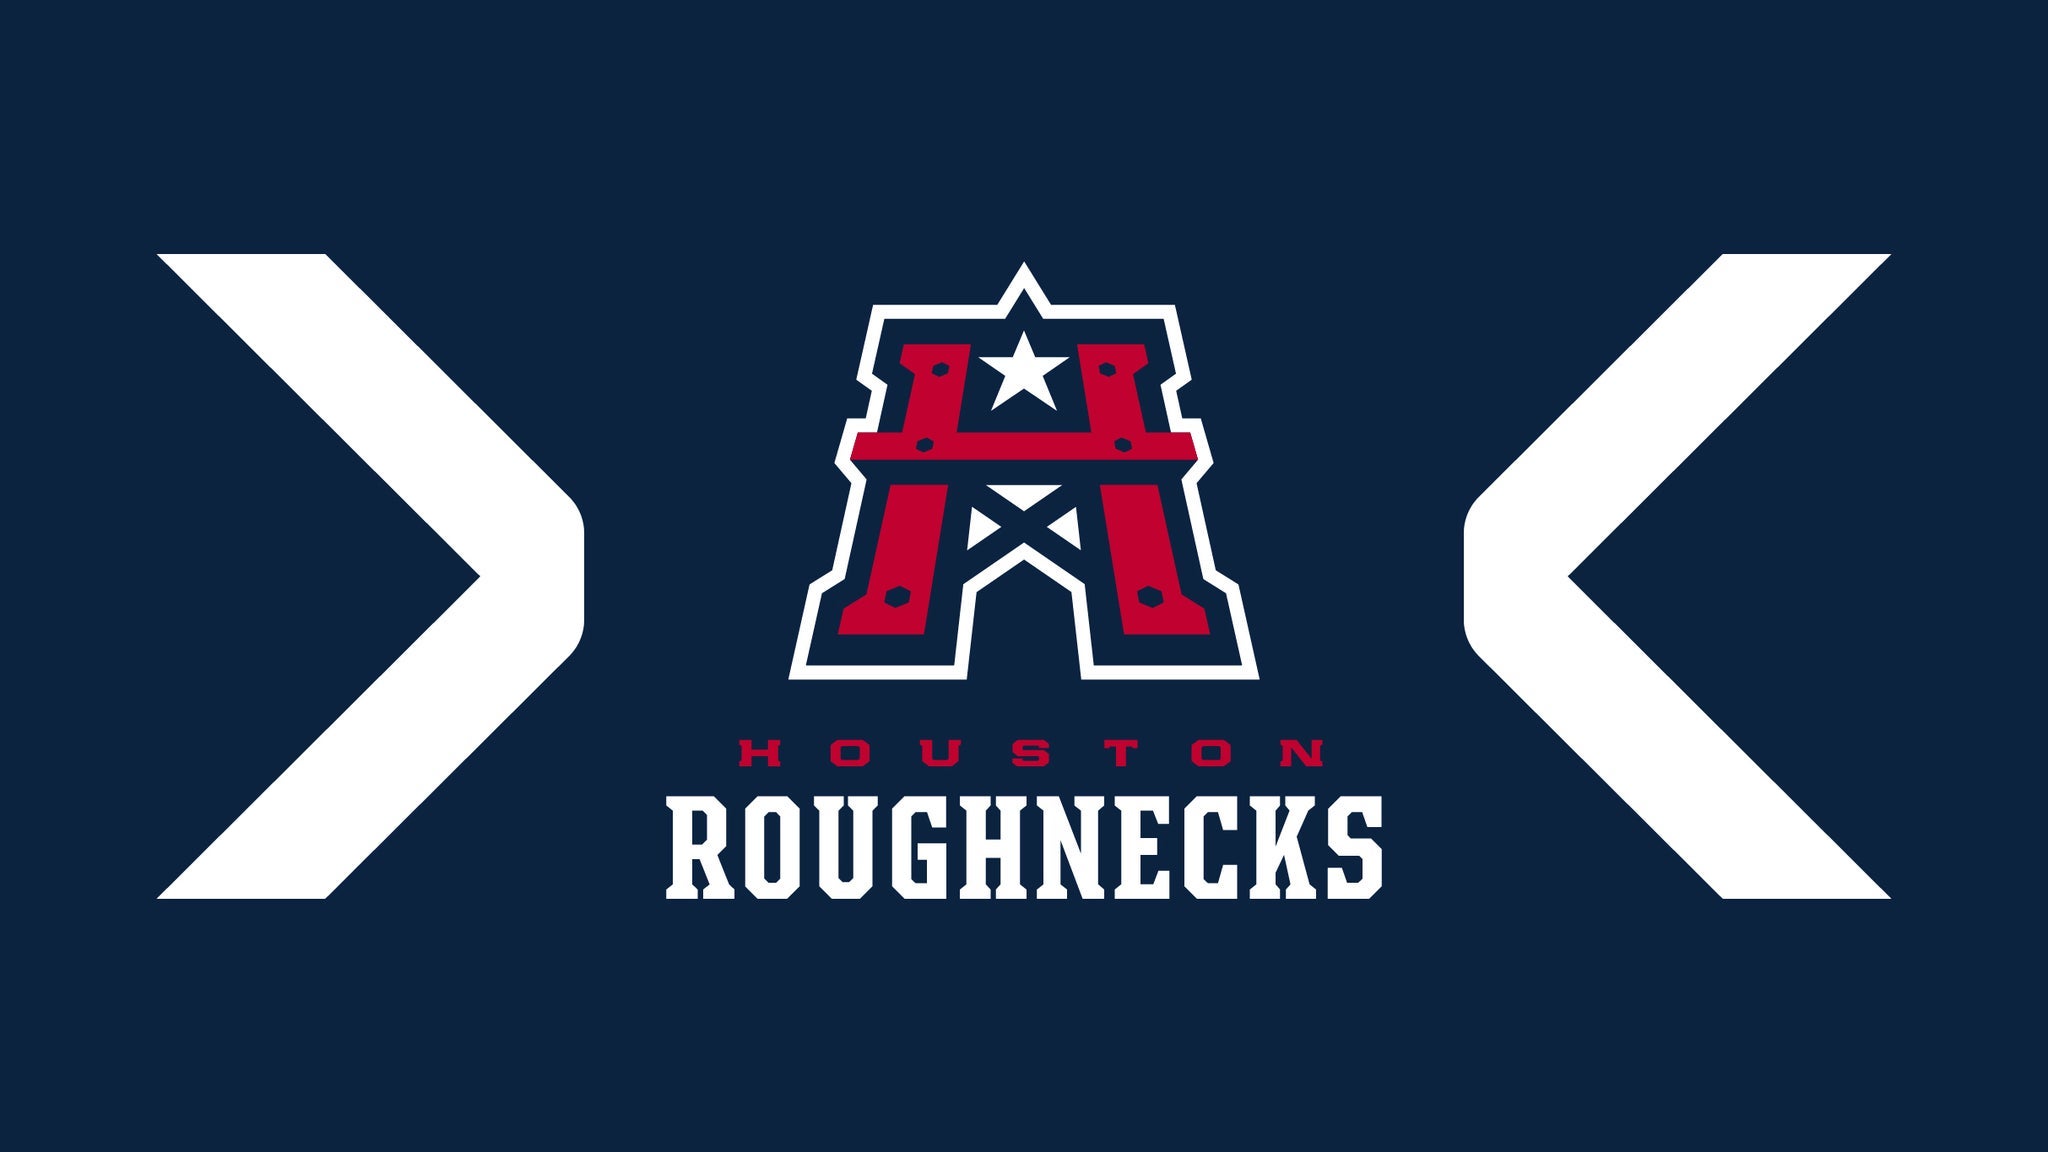 Houston Roughnecks in XFL playoffs: Tickets, when they play and more